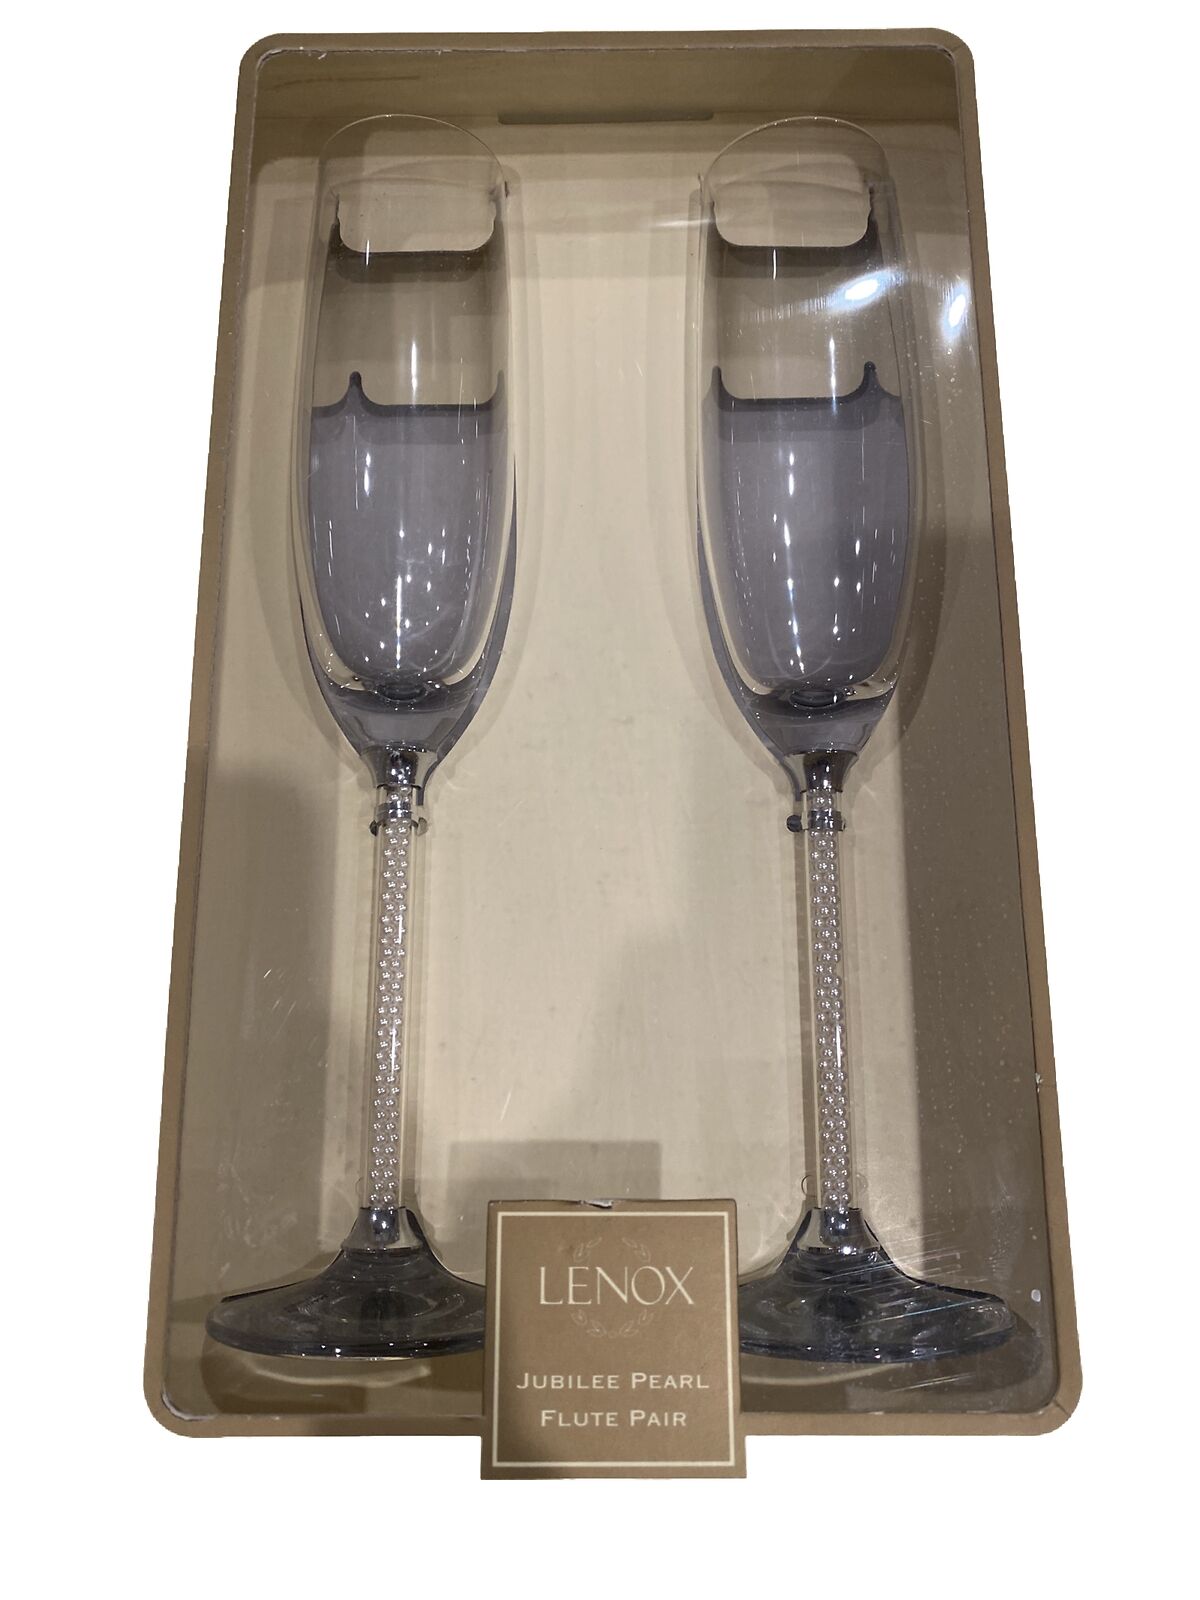 PAIR LENOX JUBILEE PEARL CHAMPAGNE TOASTING FLUTES STEMMED GOBLETS NEW